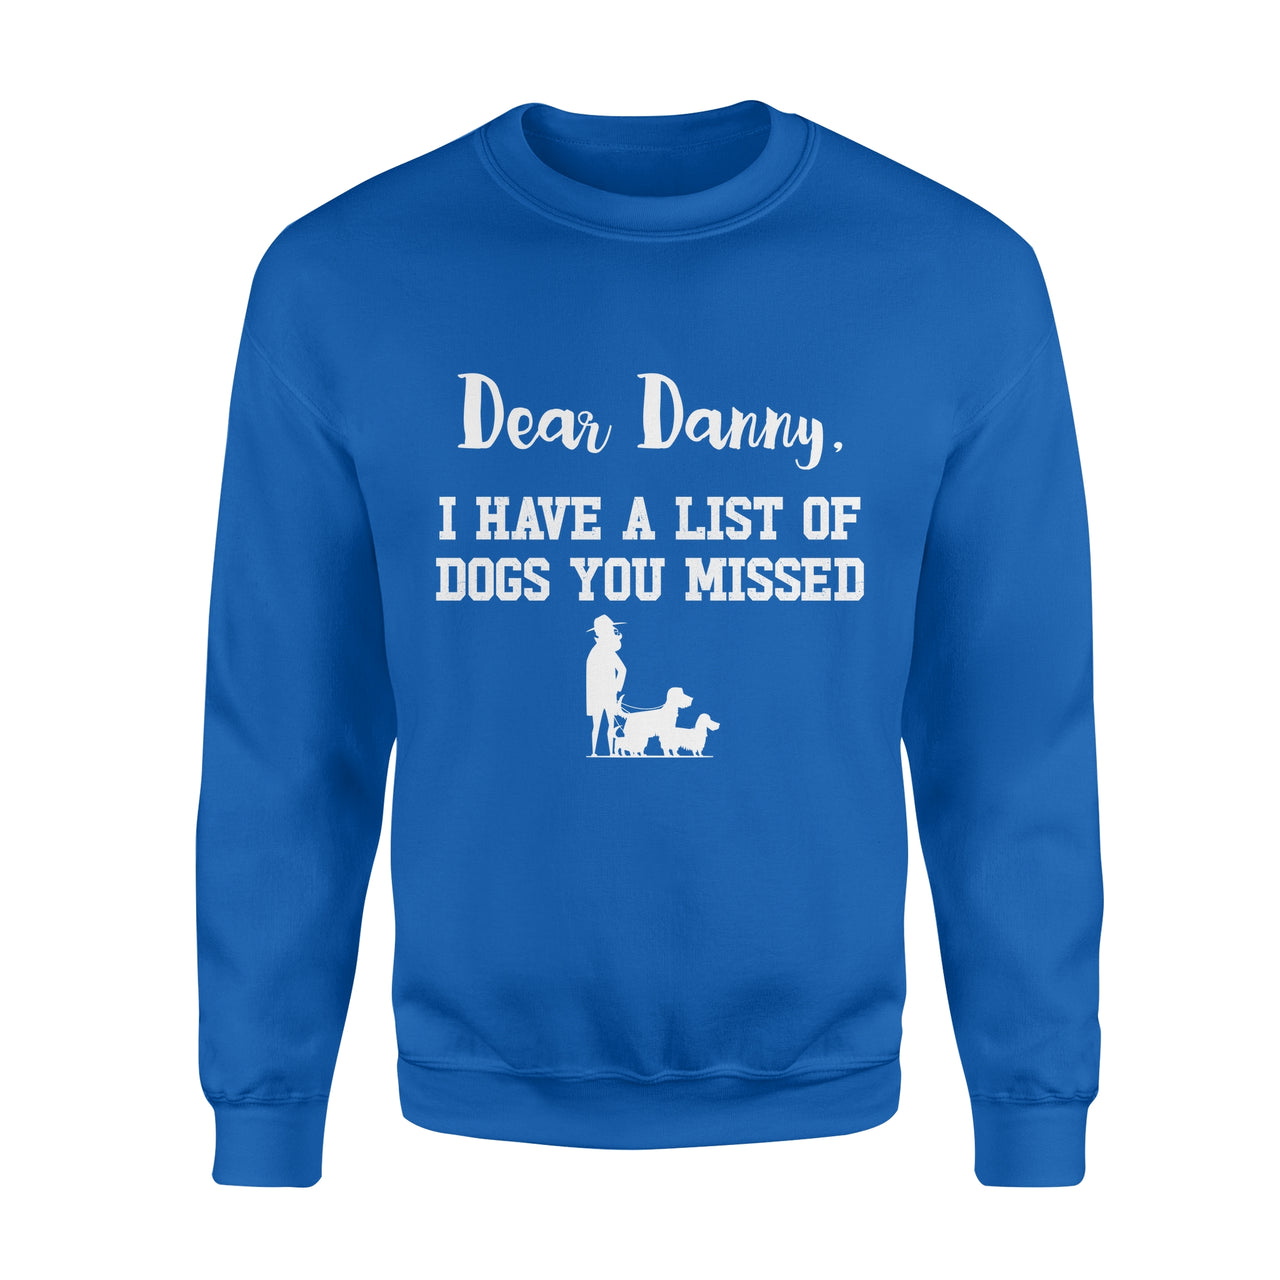 Personalized Dog Gift Idea - I Have A List Of Dogs You Missed - Standard Crew Neck Sweatshirt